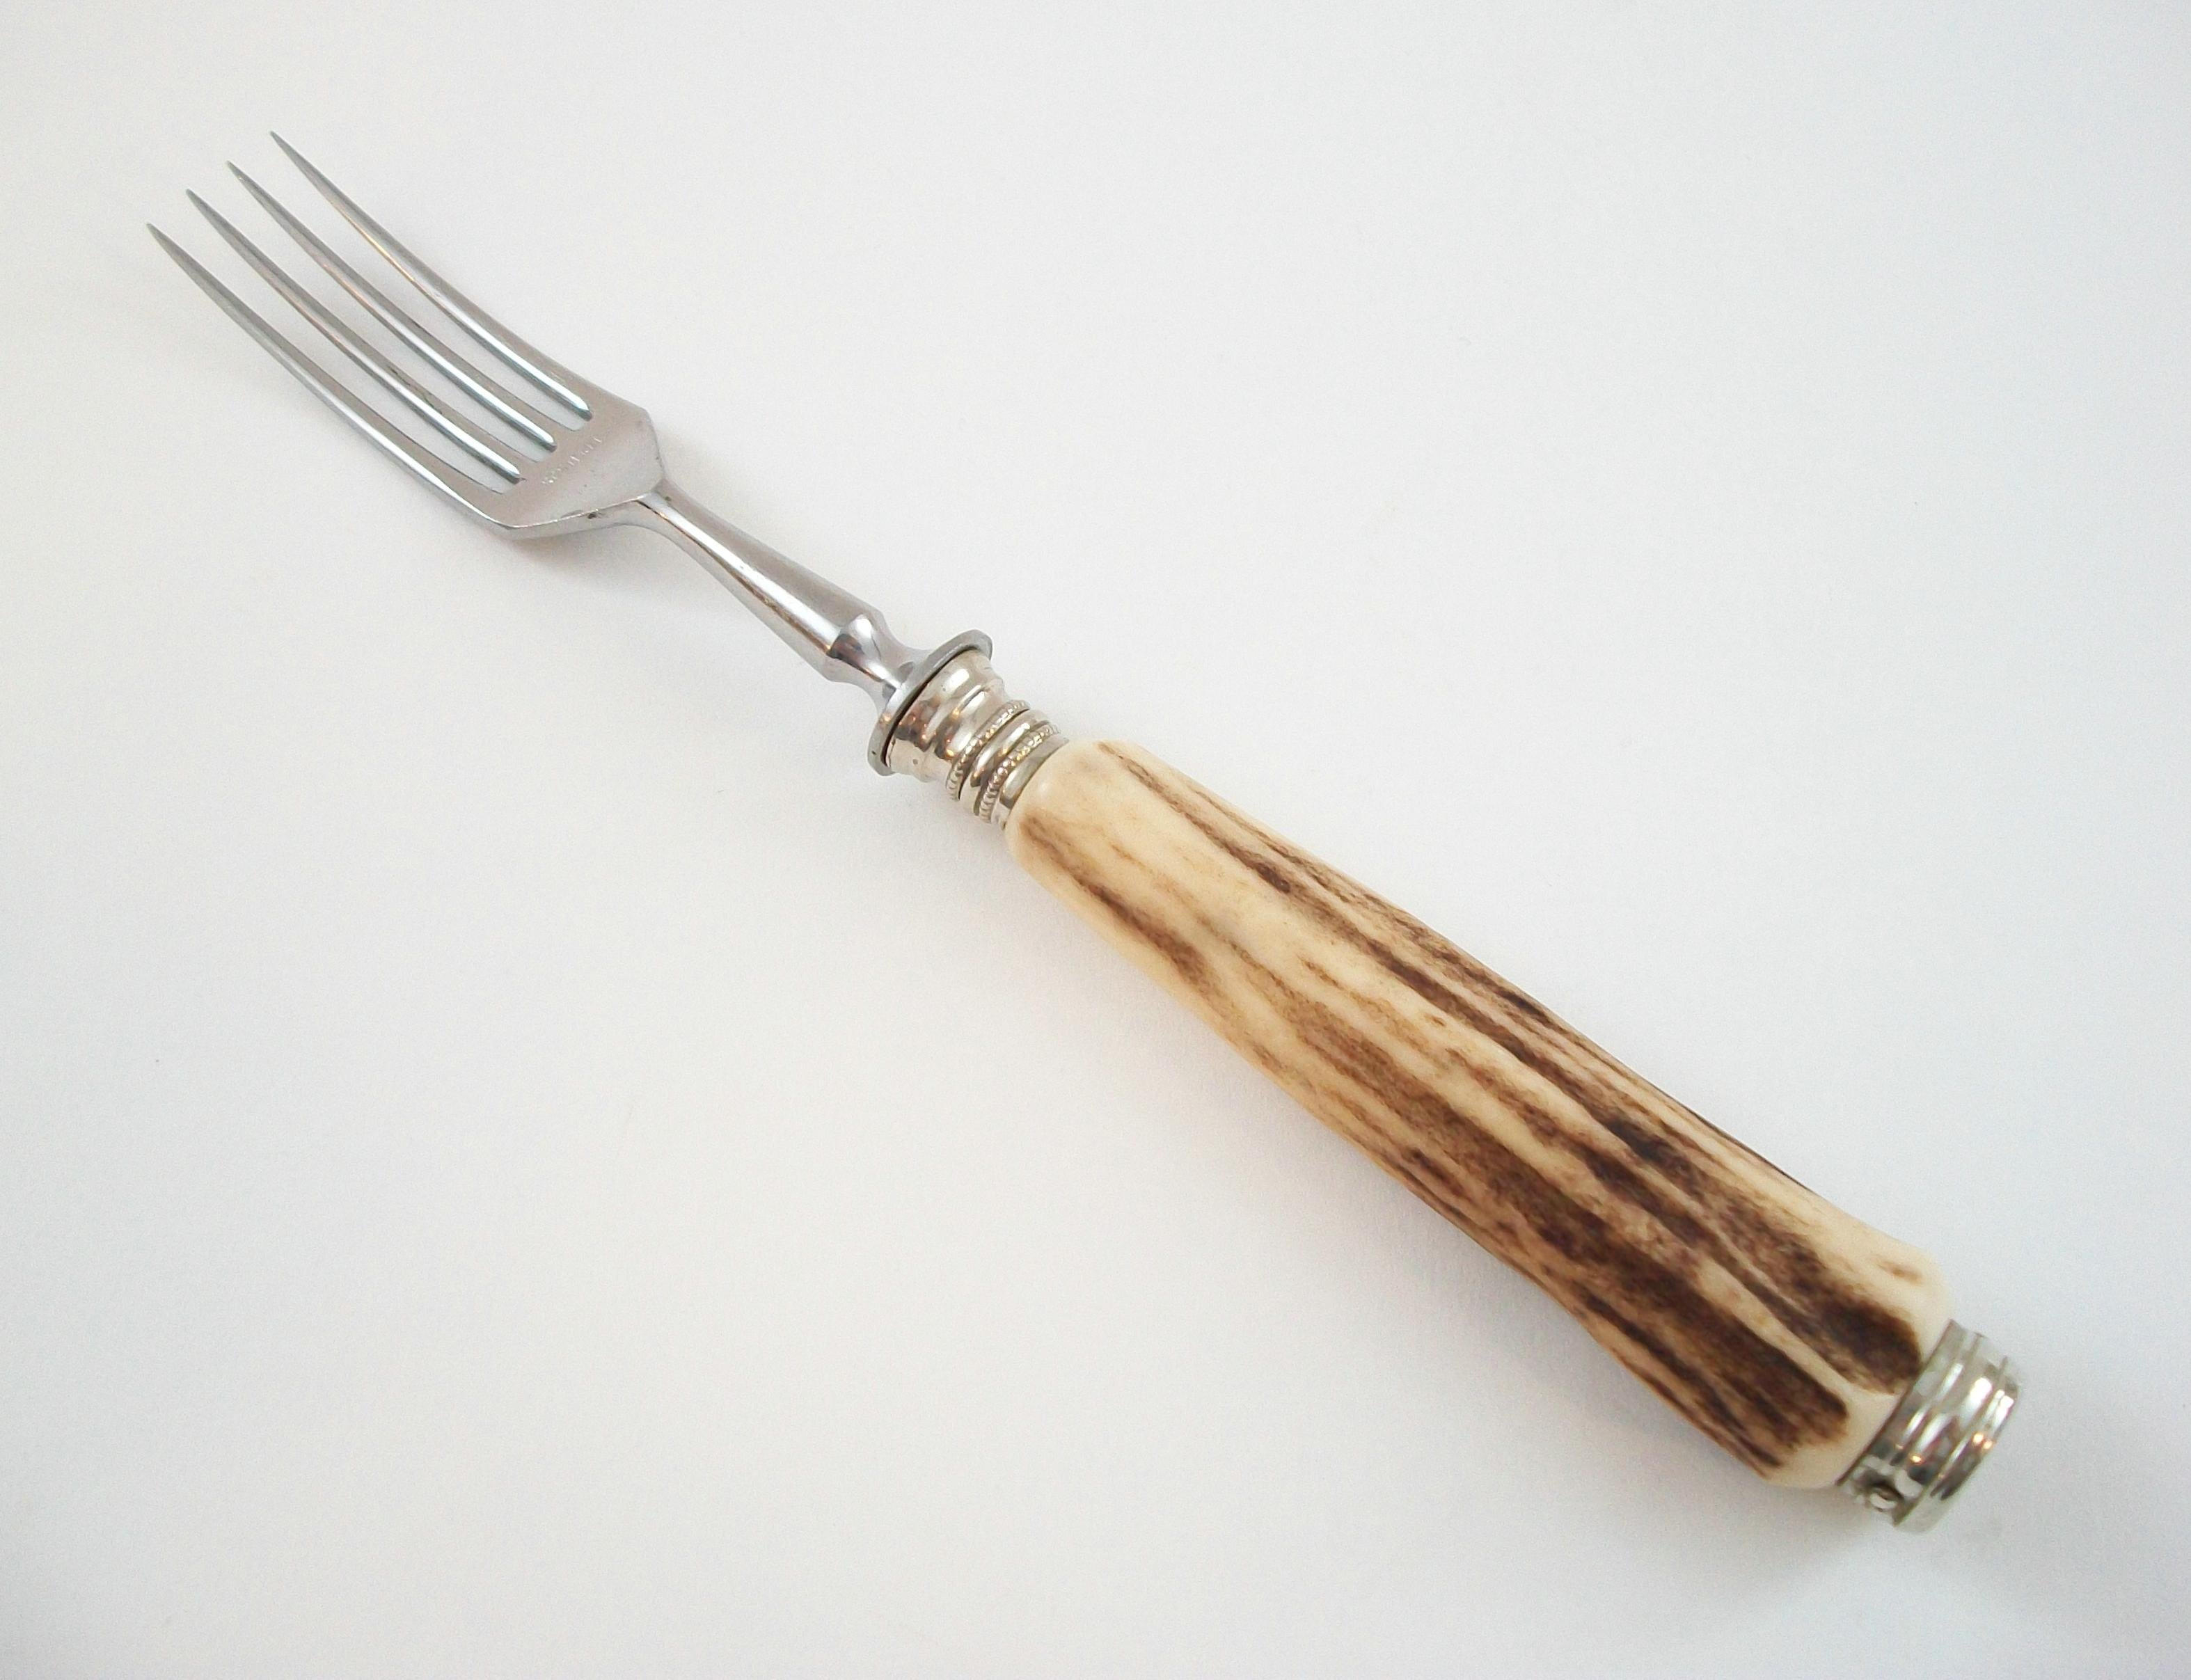 HUBERTUS SOLINGEN - Vintage stainless steel fork - featuring an antler handle - unsigned - Germany - circa 1950's.

Excellent vintage condition - surface scratches - enamel loss - no restoration - signs of age and use.

Size / Dimensions - 7 1/2